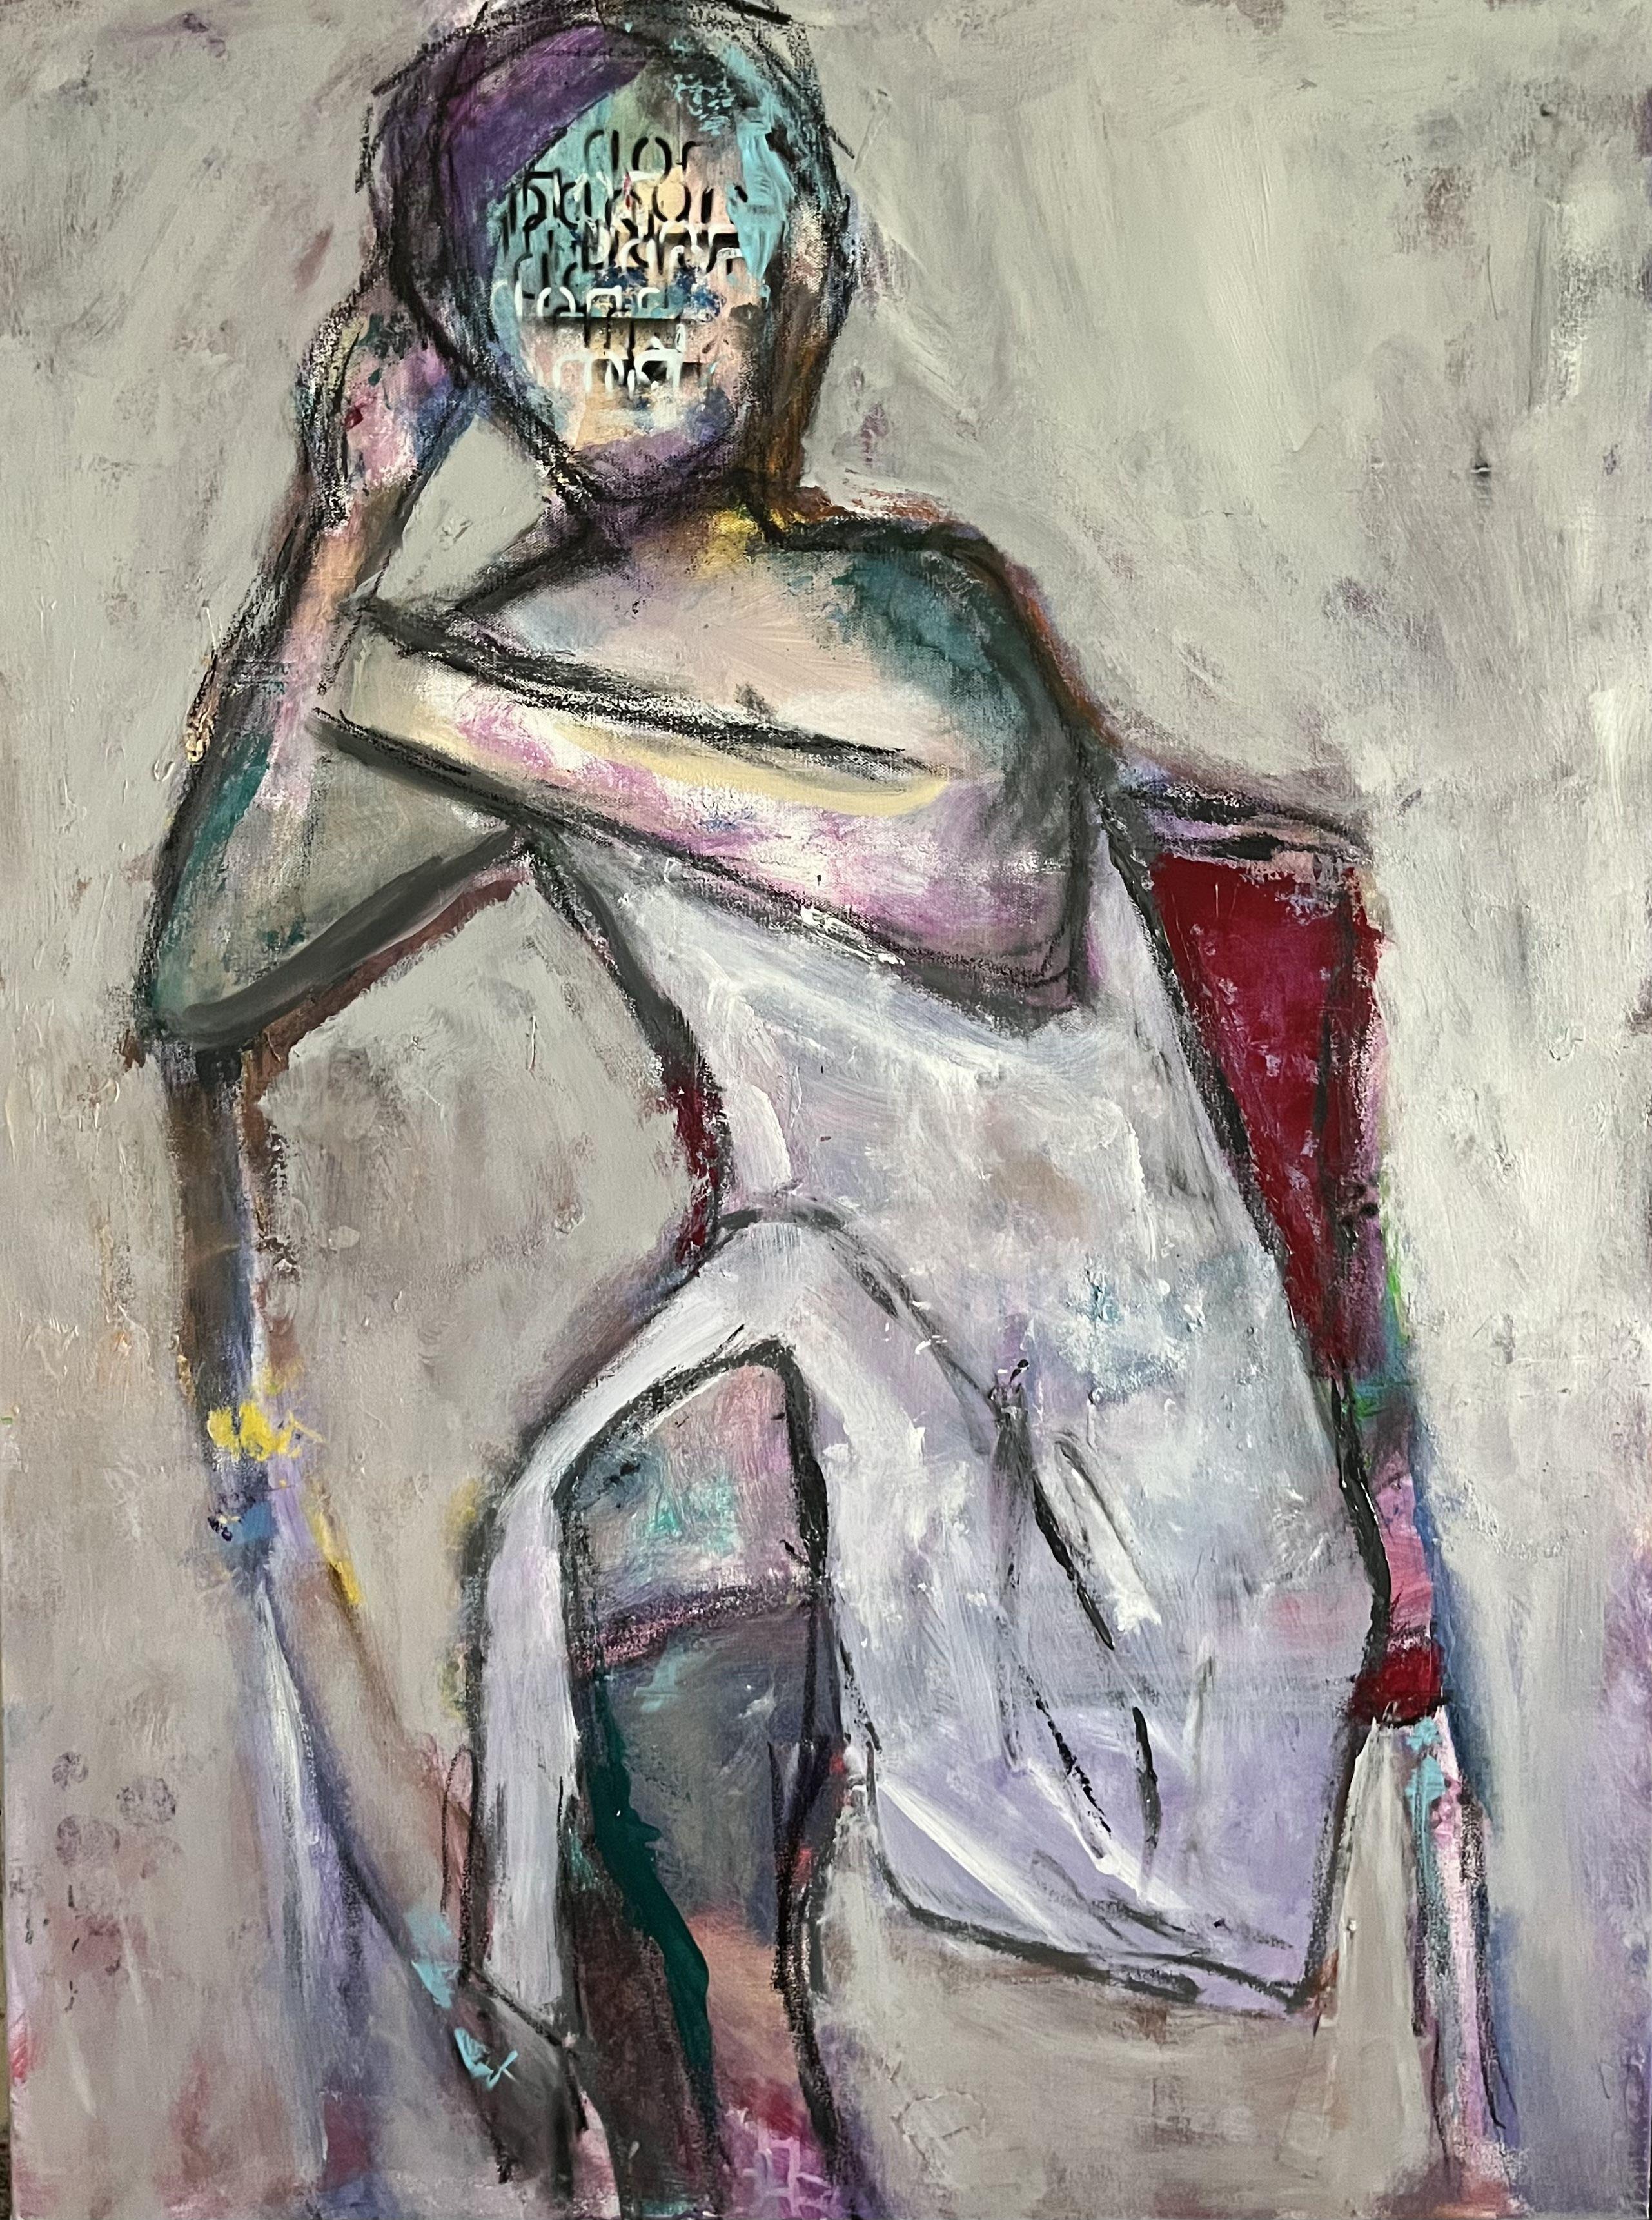 Sarah Boisvert combines abstraction and figuration in her stunning works.    She plucks personal references, experiences, and memories to create thoroughly expressive paintings. While the human figure is there, she has moved away from making